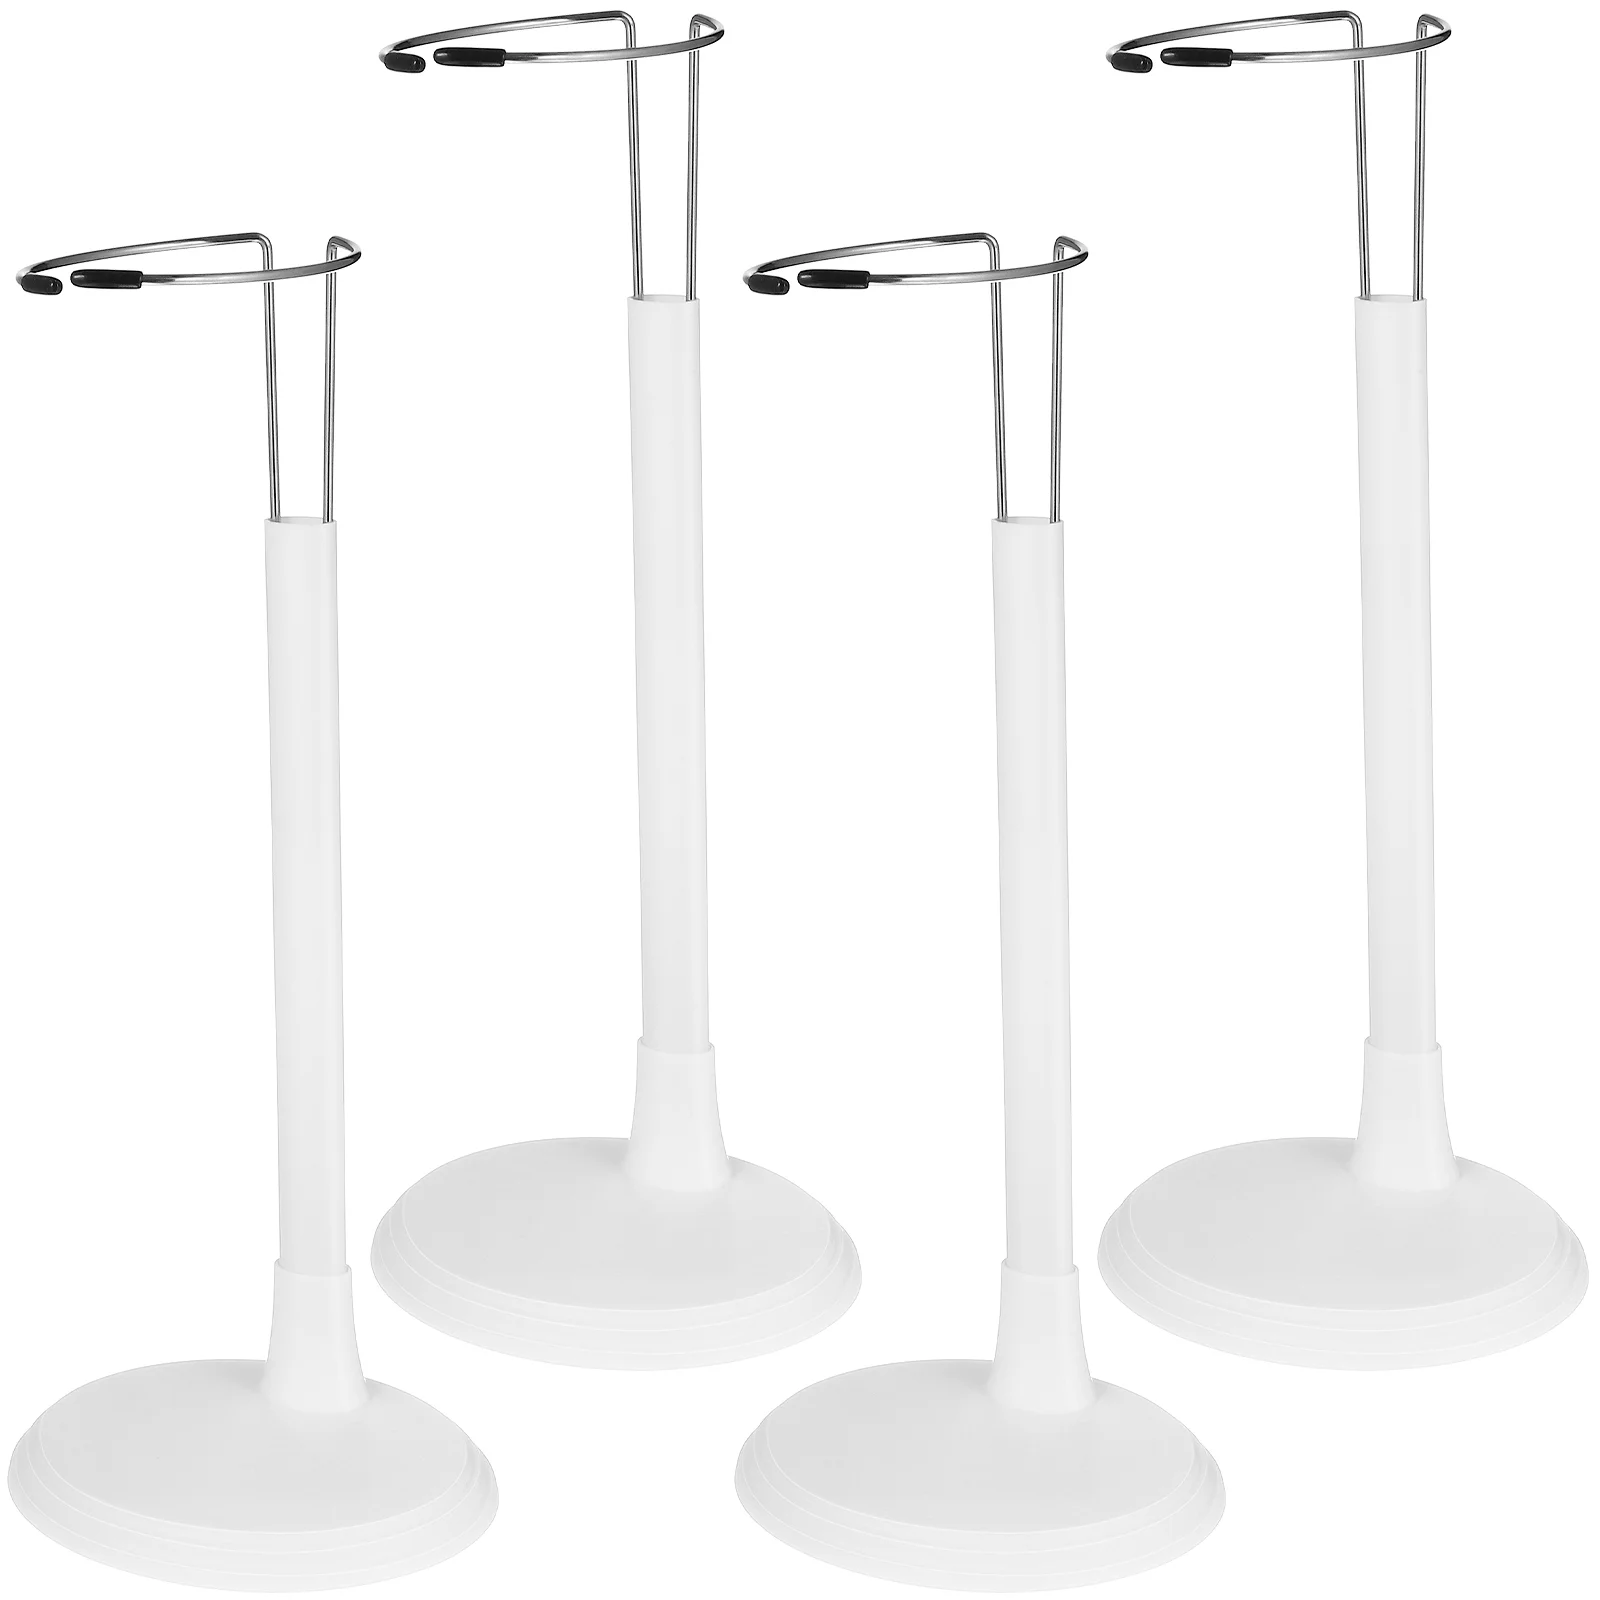 

4 Pcs Stands Action Figure Display Organizers Support Brackets Holders for Home Shop